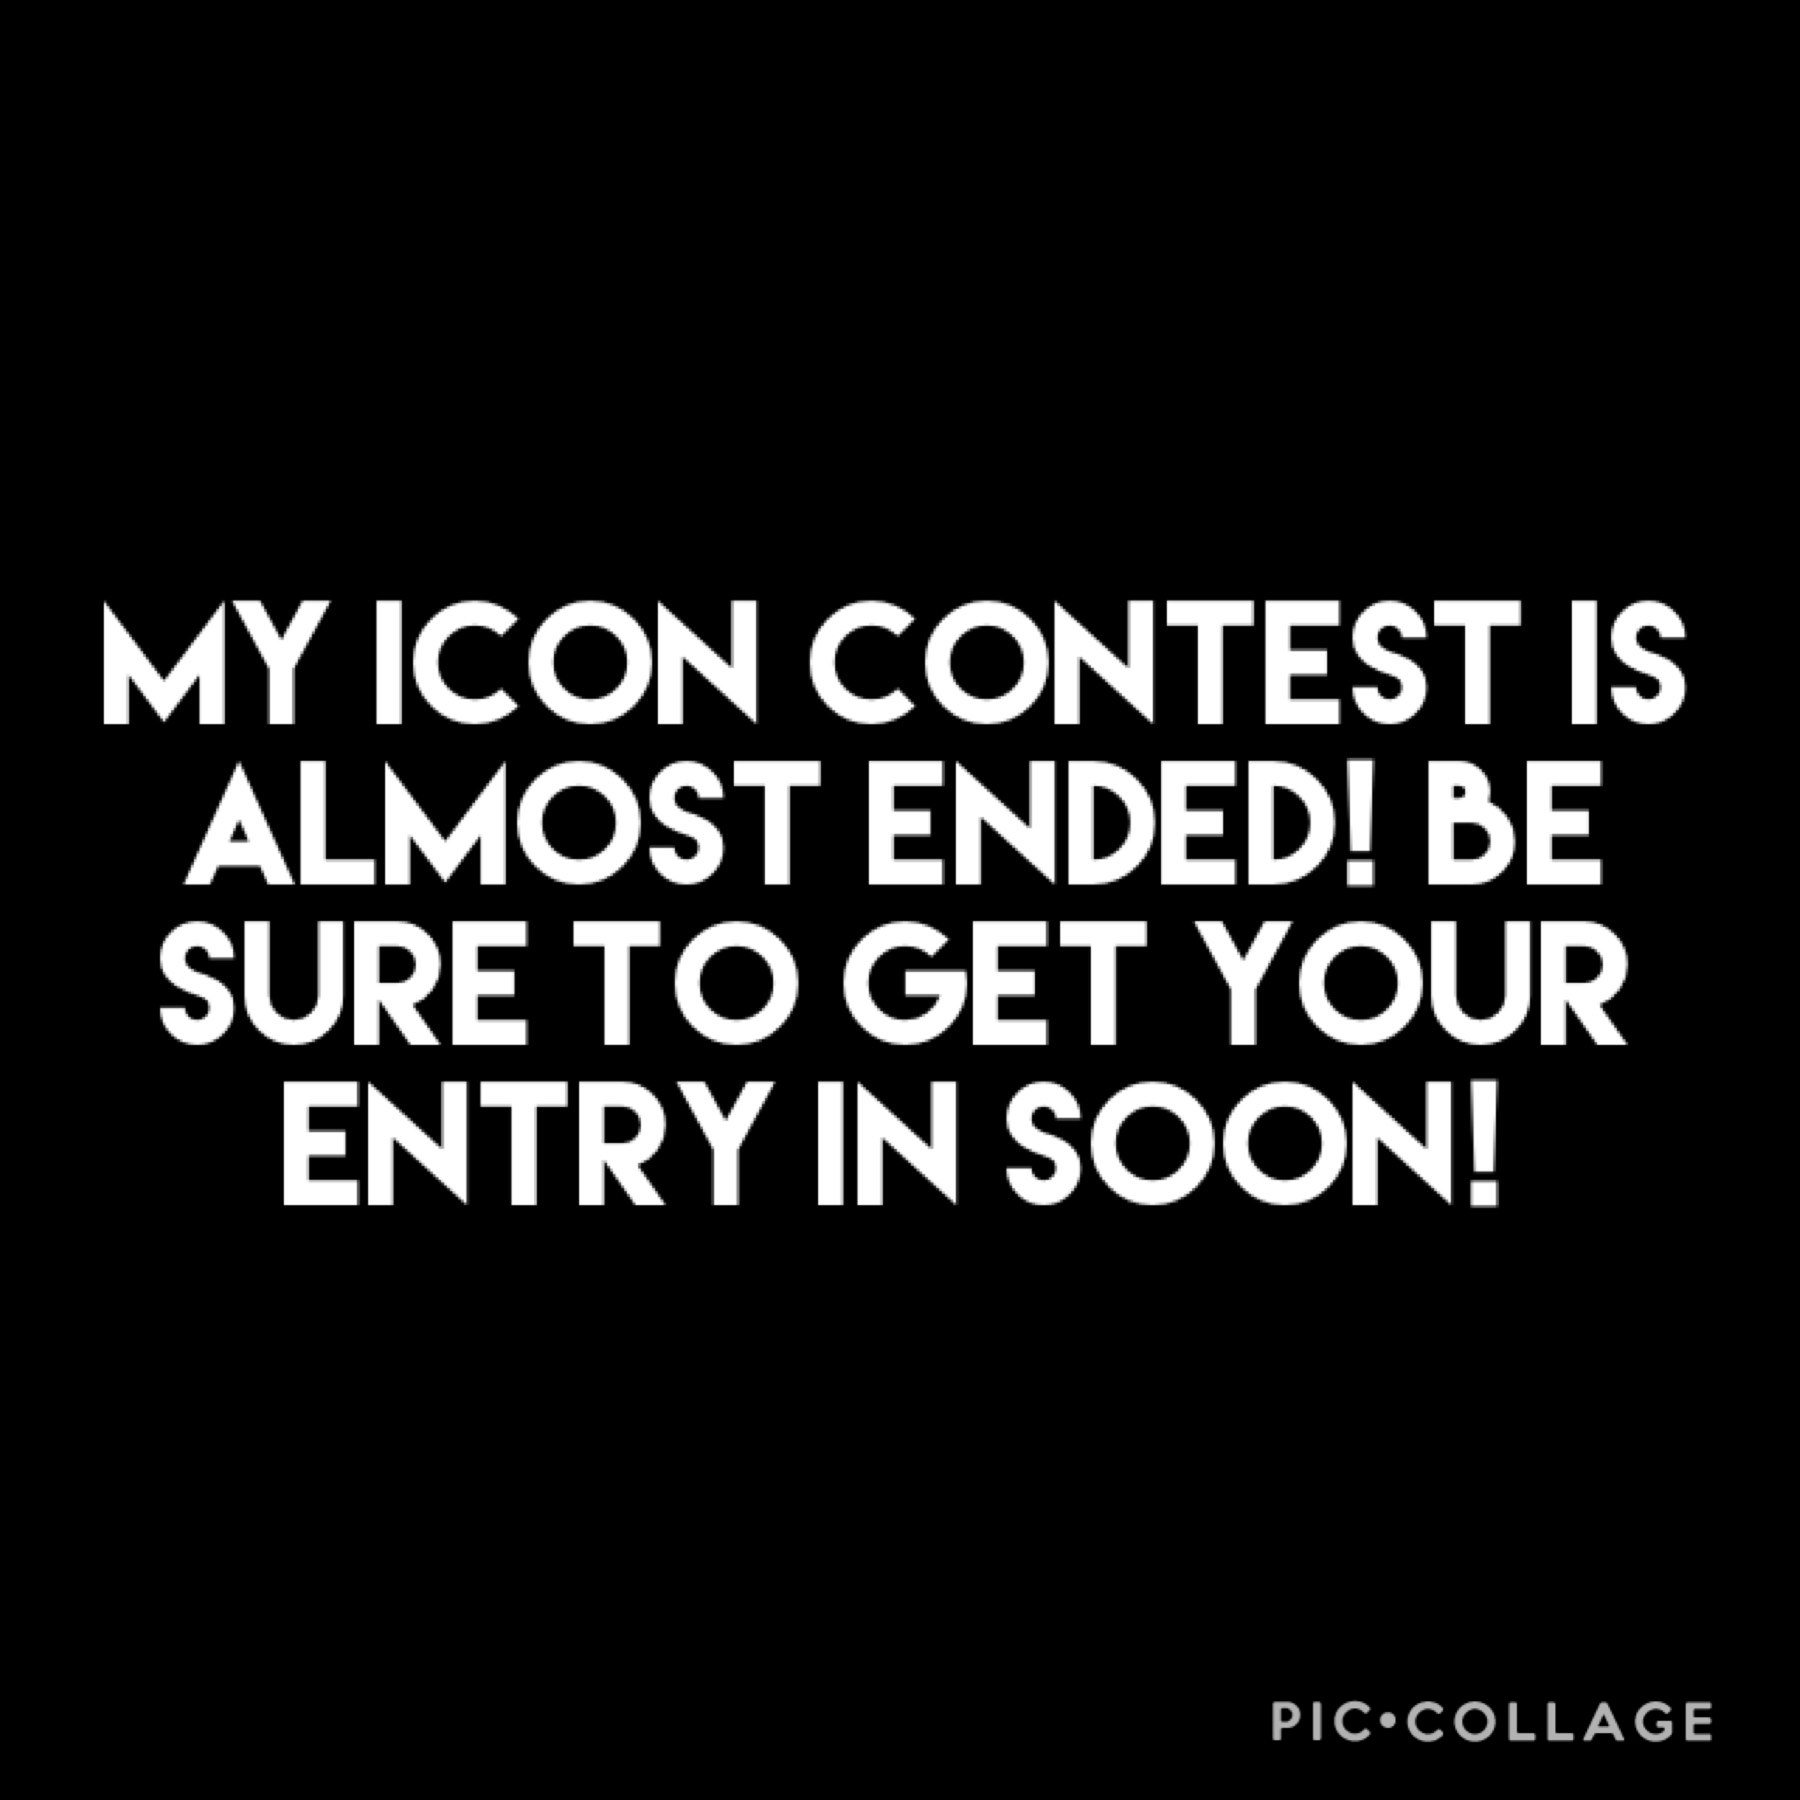 Be sure to enter soon! 